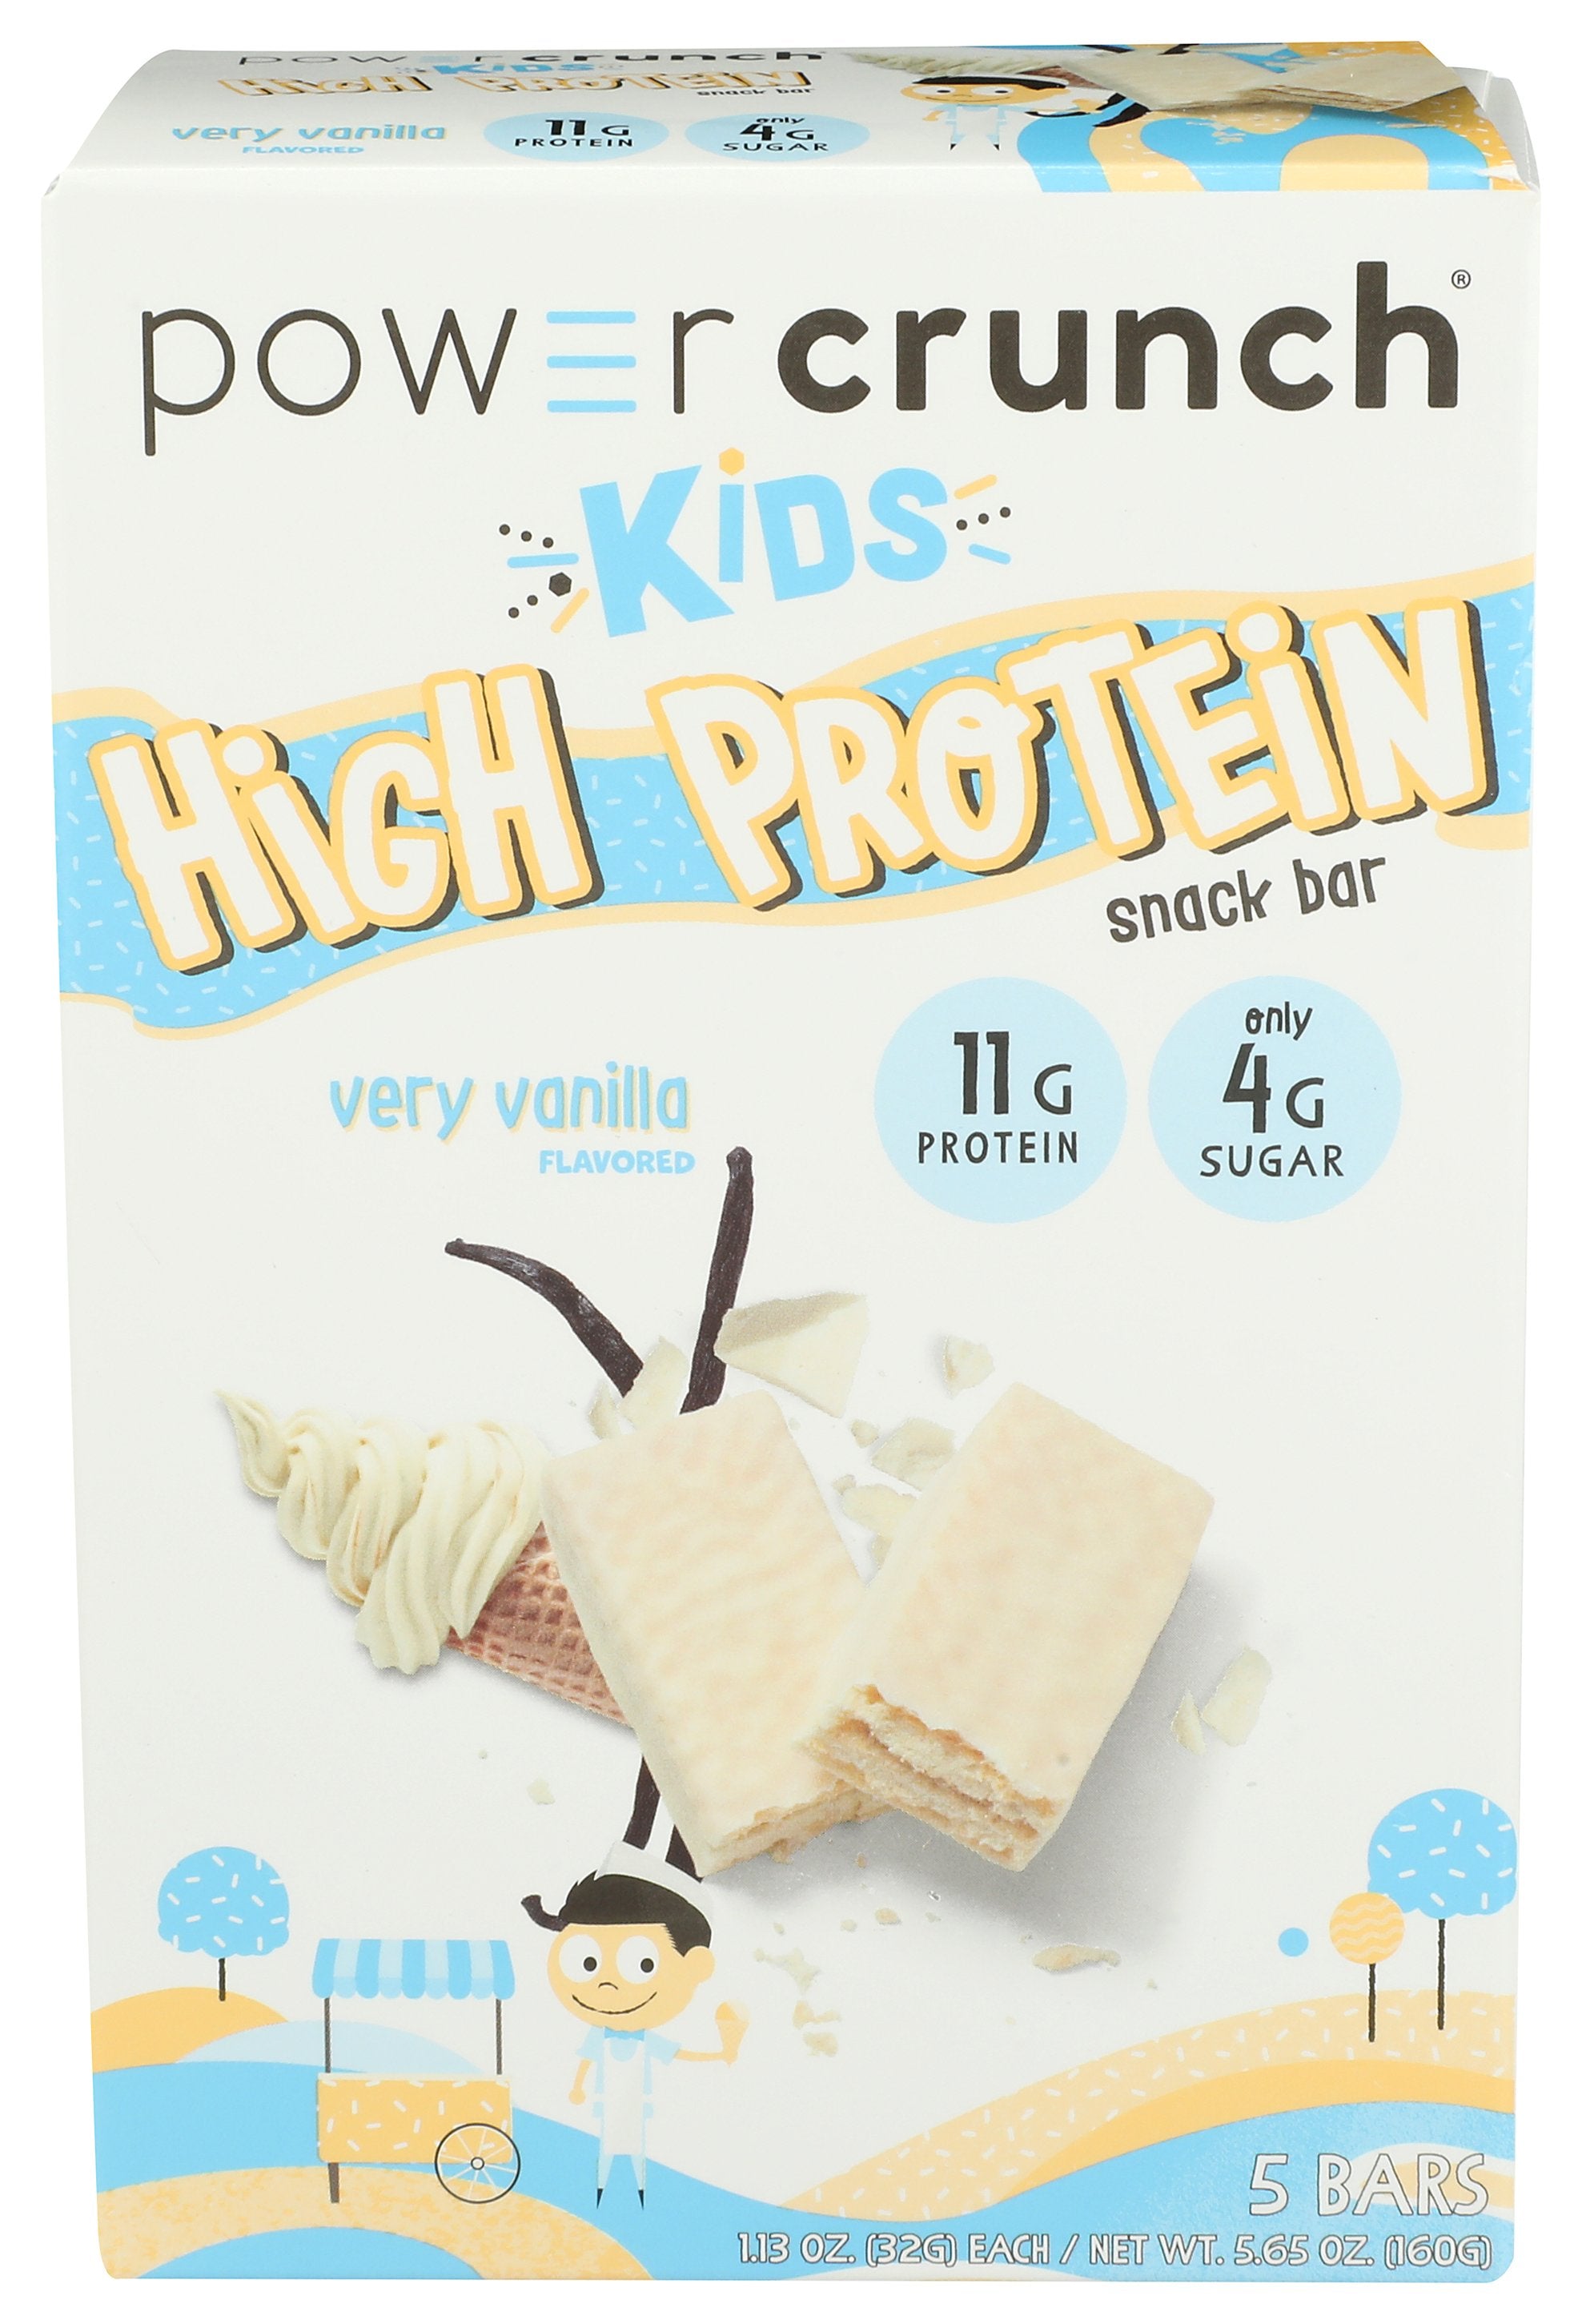 POWER CRUNCH BAR VNLL PWR CRNCH KDS 5 - Case of 6